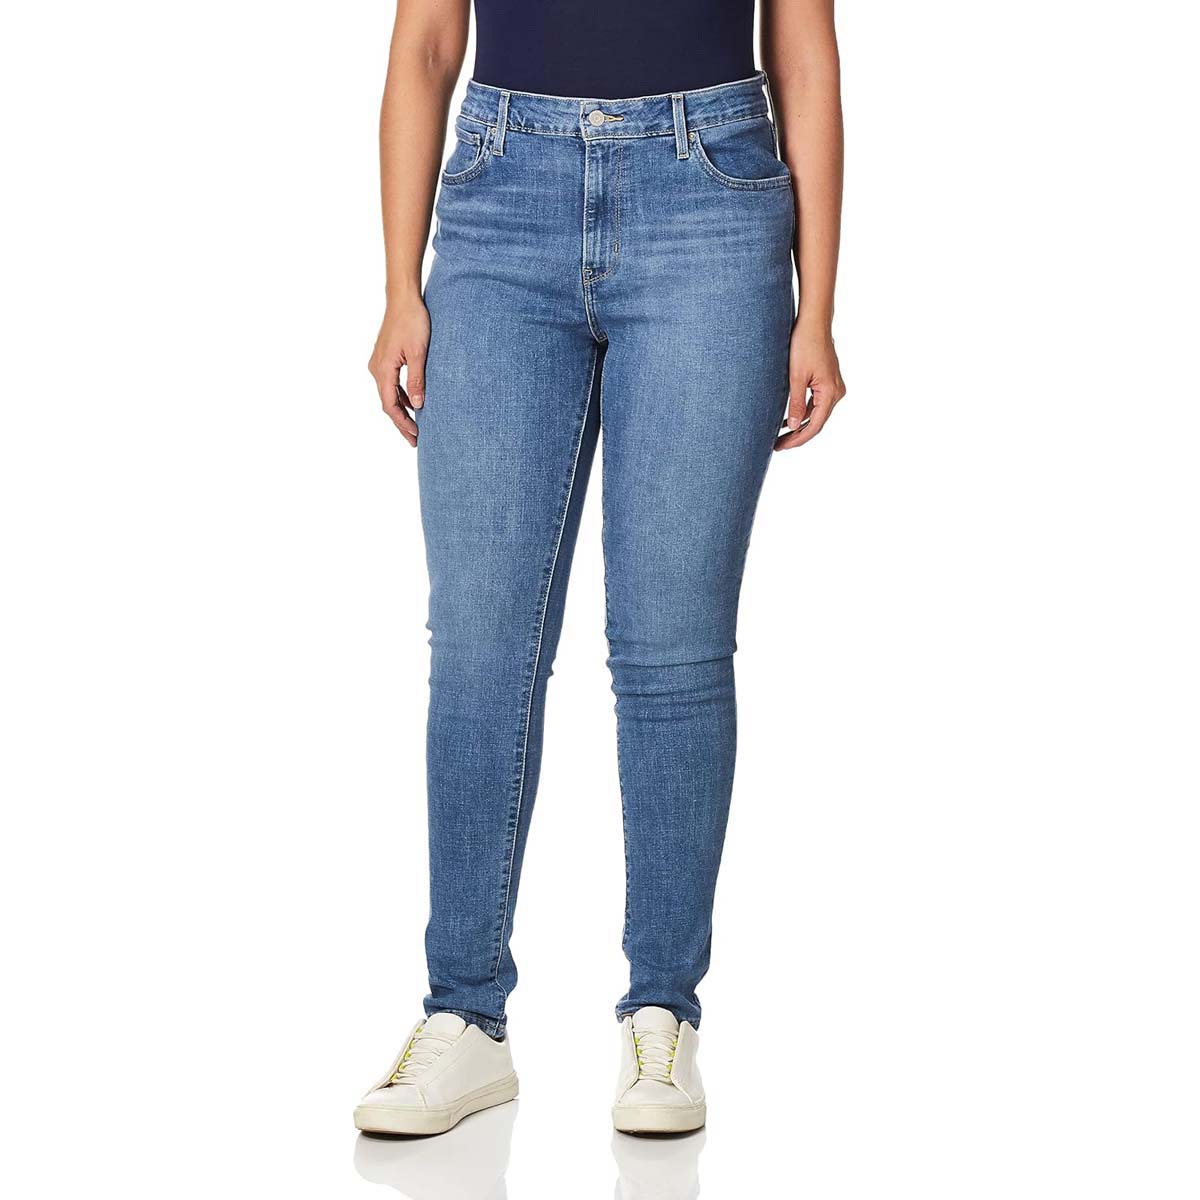 Levi's® Women's 721™ High-Rise Skinny Jeans - High Beams 29